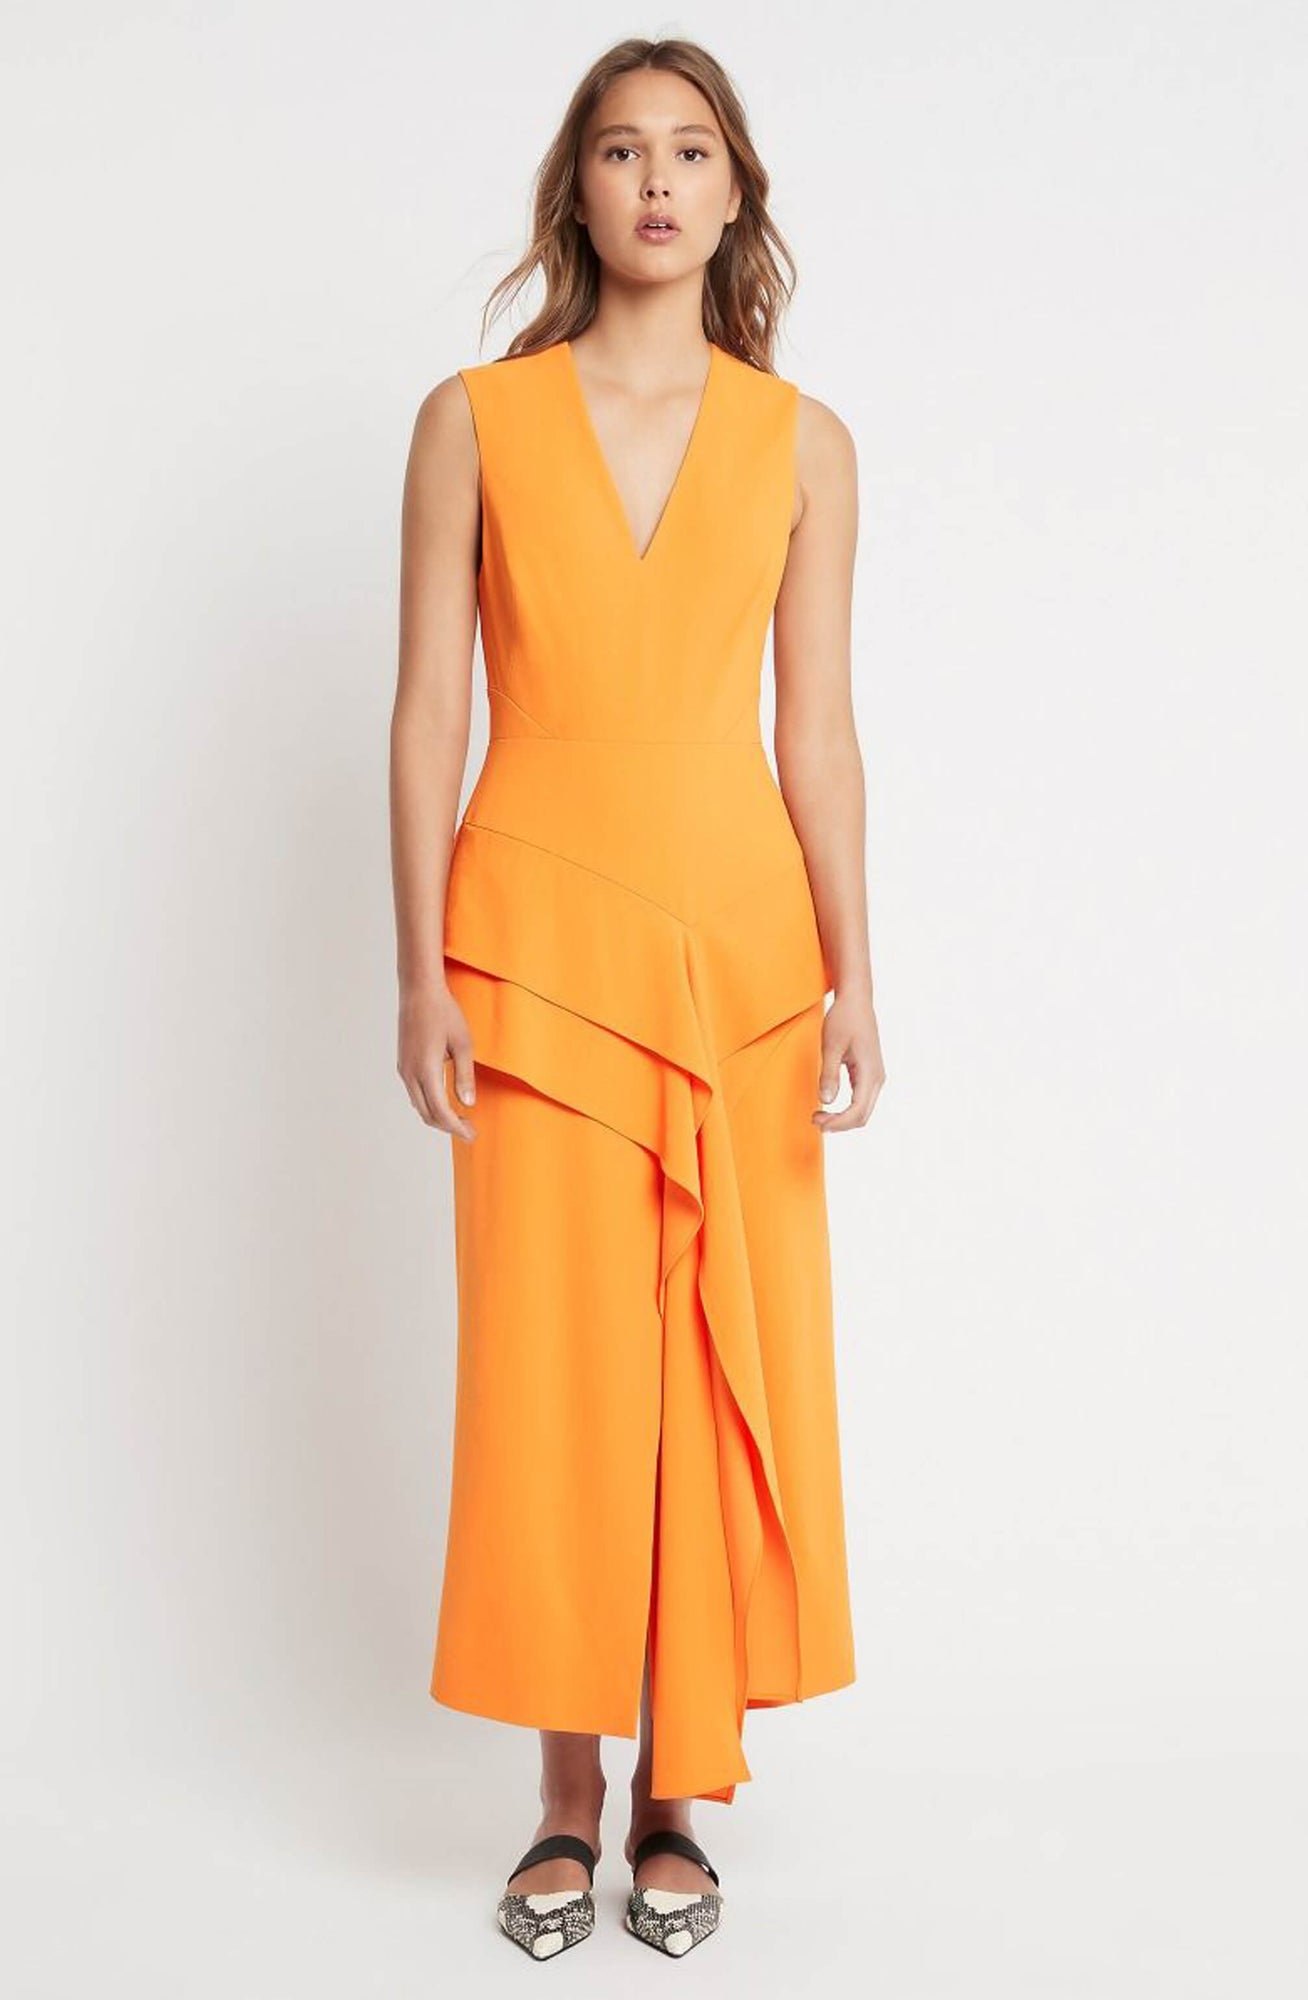 Moon Movement Dress by Sass & Bide for SALE – High St. Hire